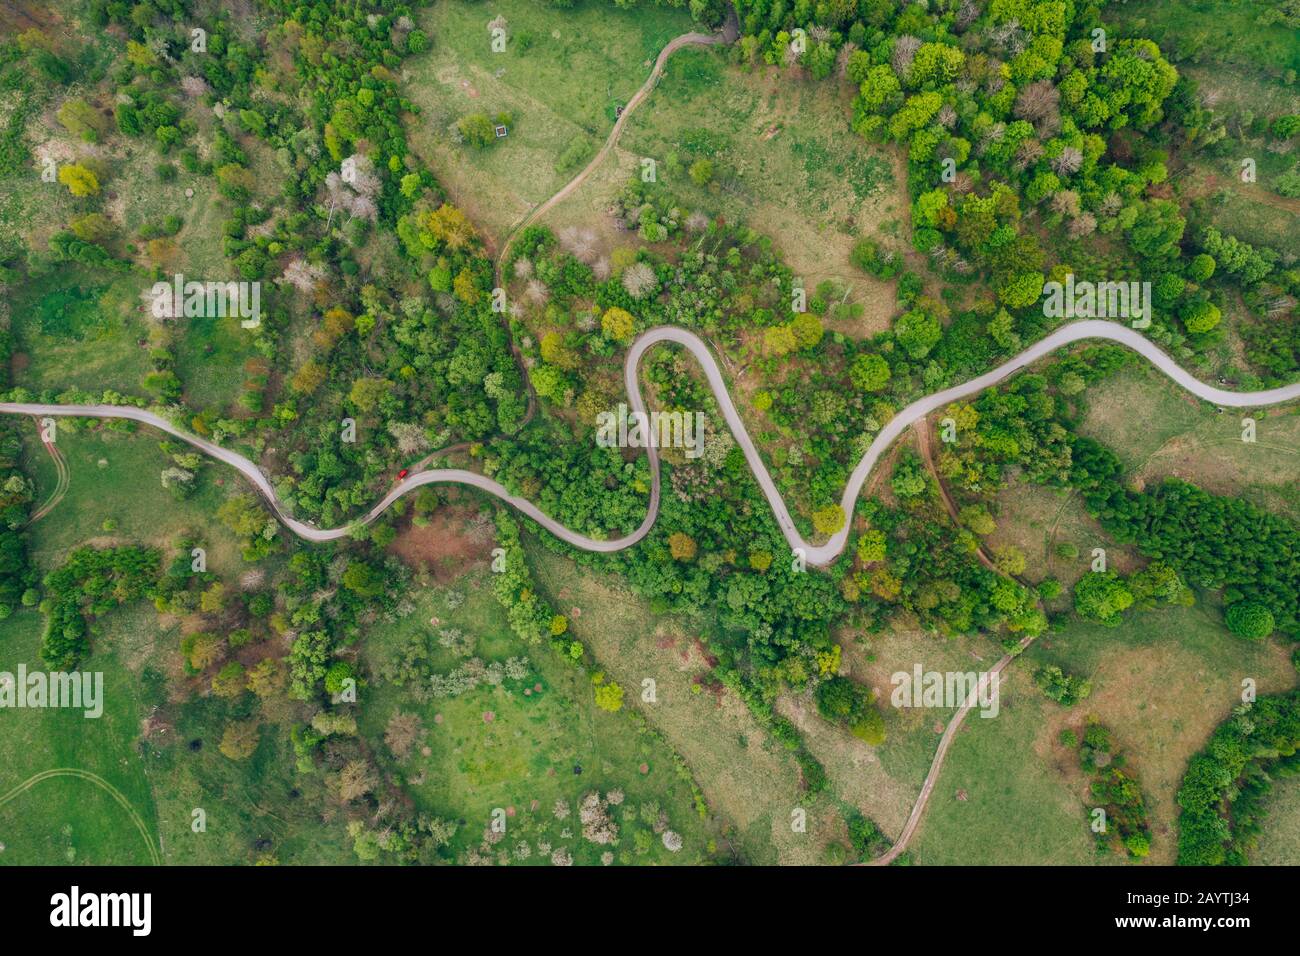 Drone view of green meadows, small houses and roads in Transylvania, Romania. Stock Photo